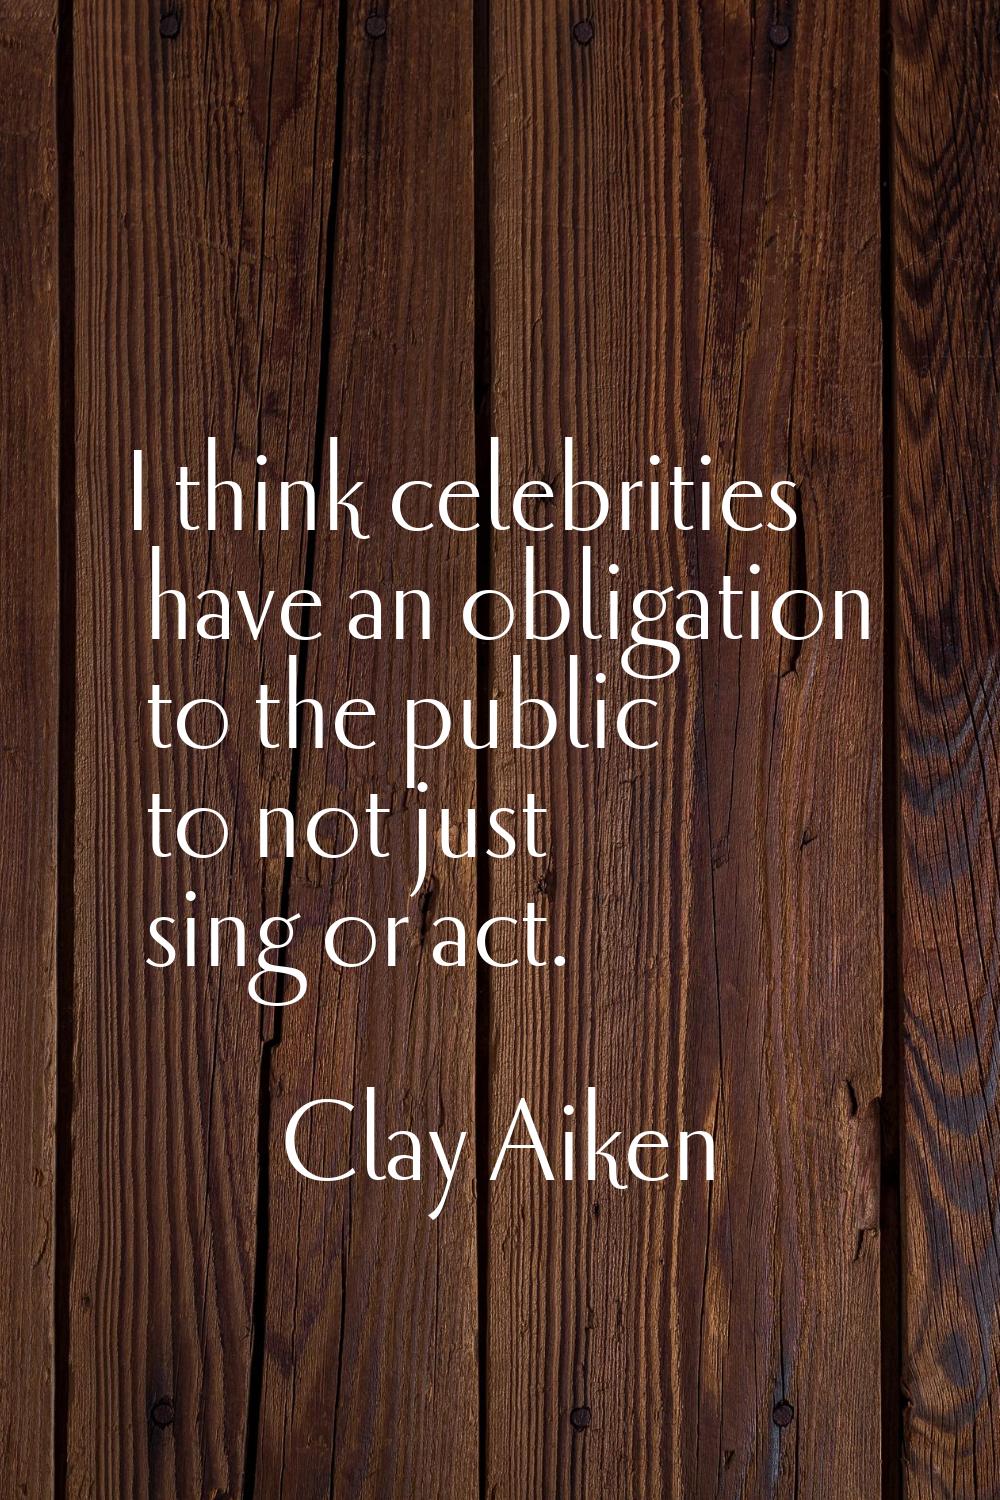 I think celebrities have an obligation to the public to not just sing or act.